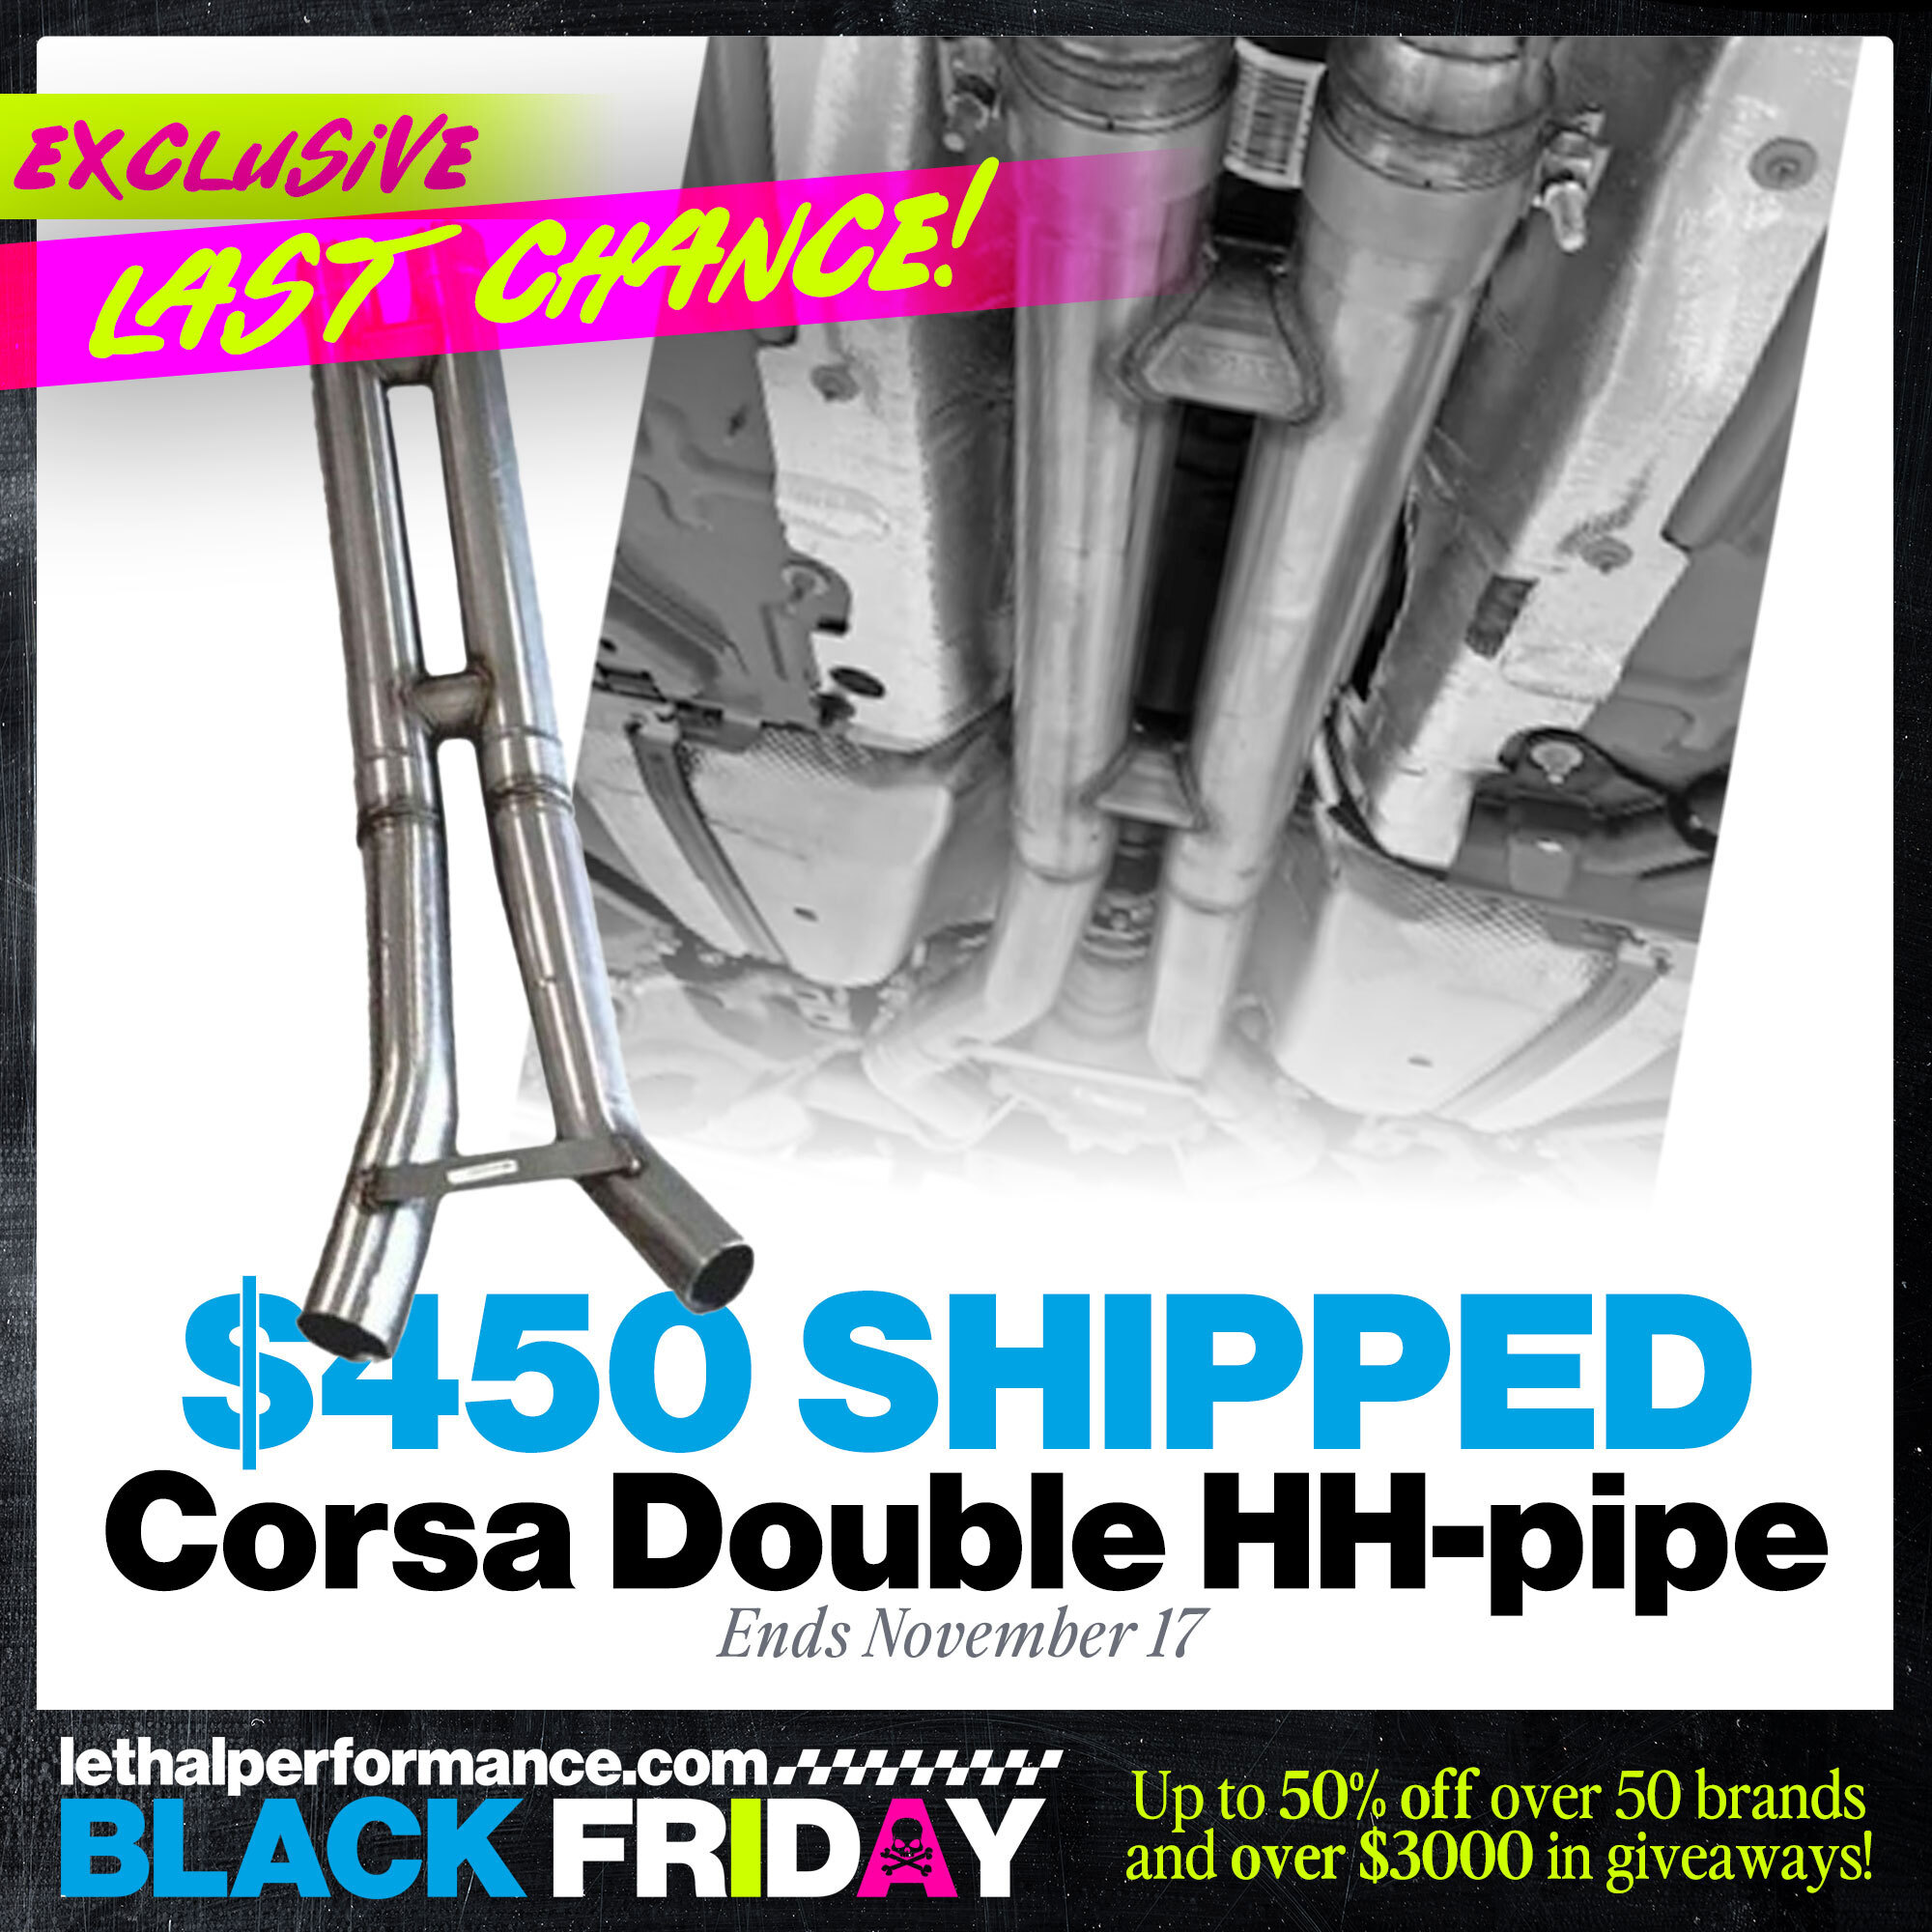 S650 Mustang Black Friday starts NOW! Up to 50% off! HHpipe_LastChance